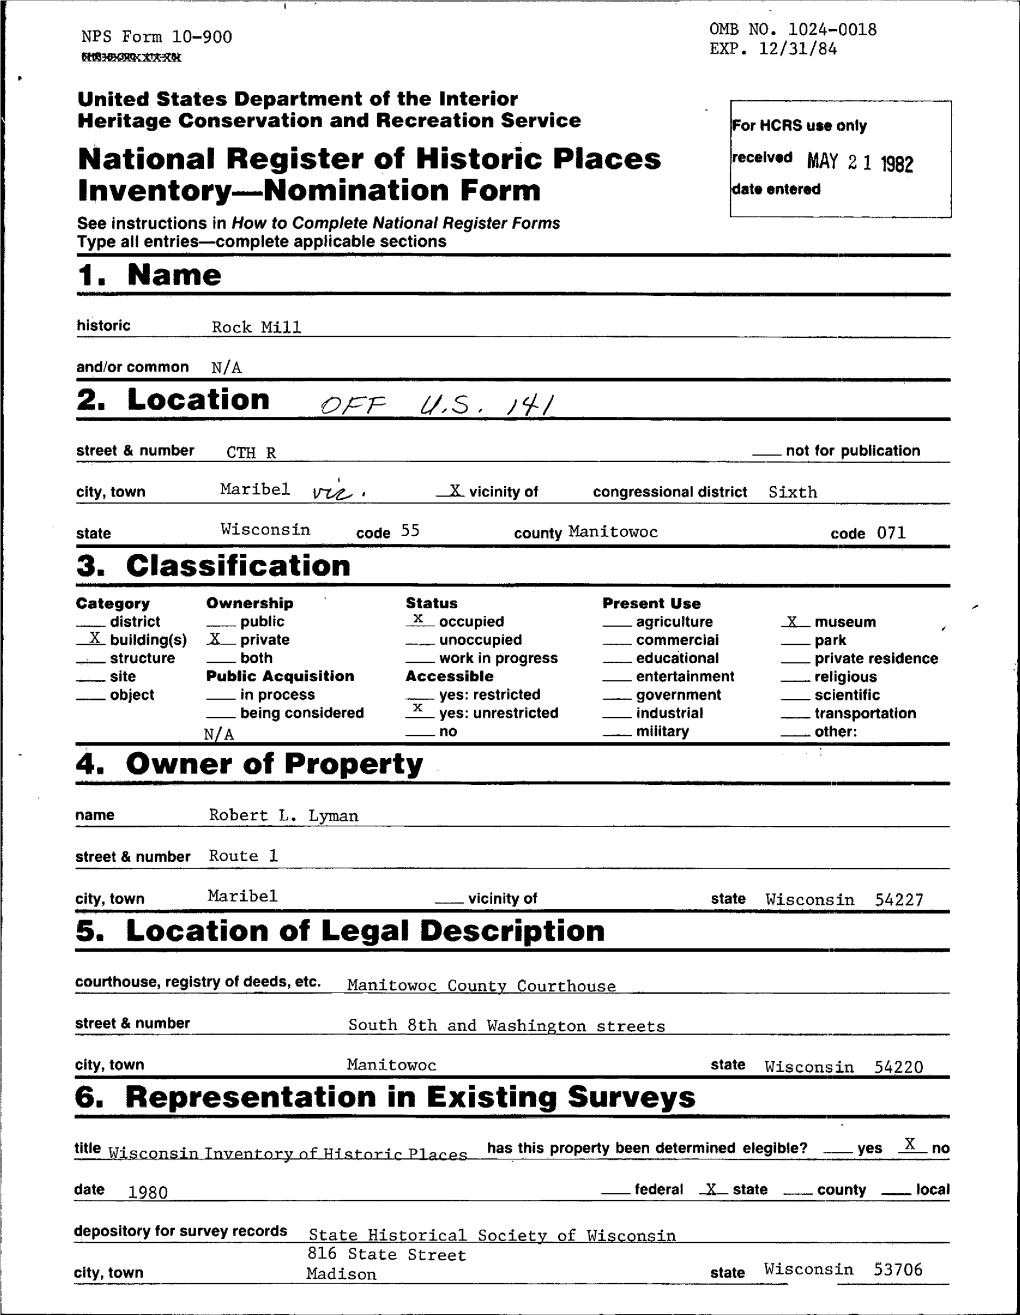 National Register of Historic Places Inventory—Nomination Form ROCK MILL, Maribel Vicinity, Manitowoc Co., Wise